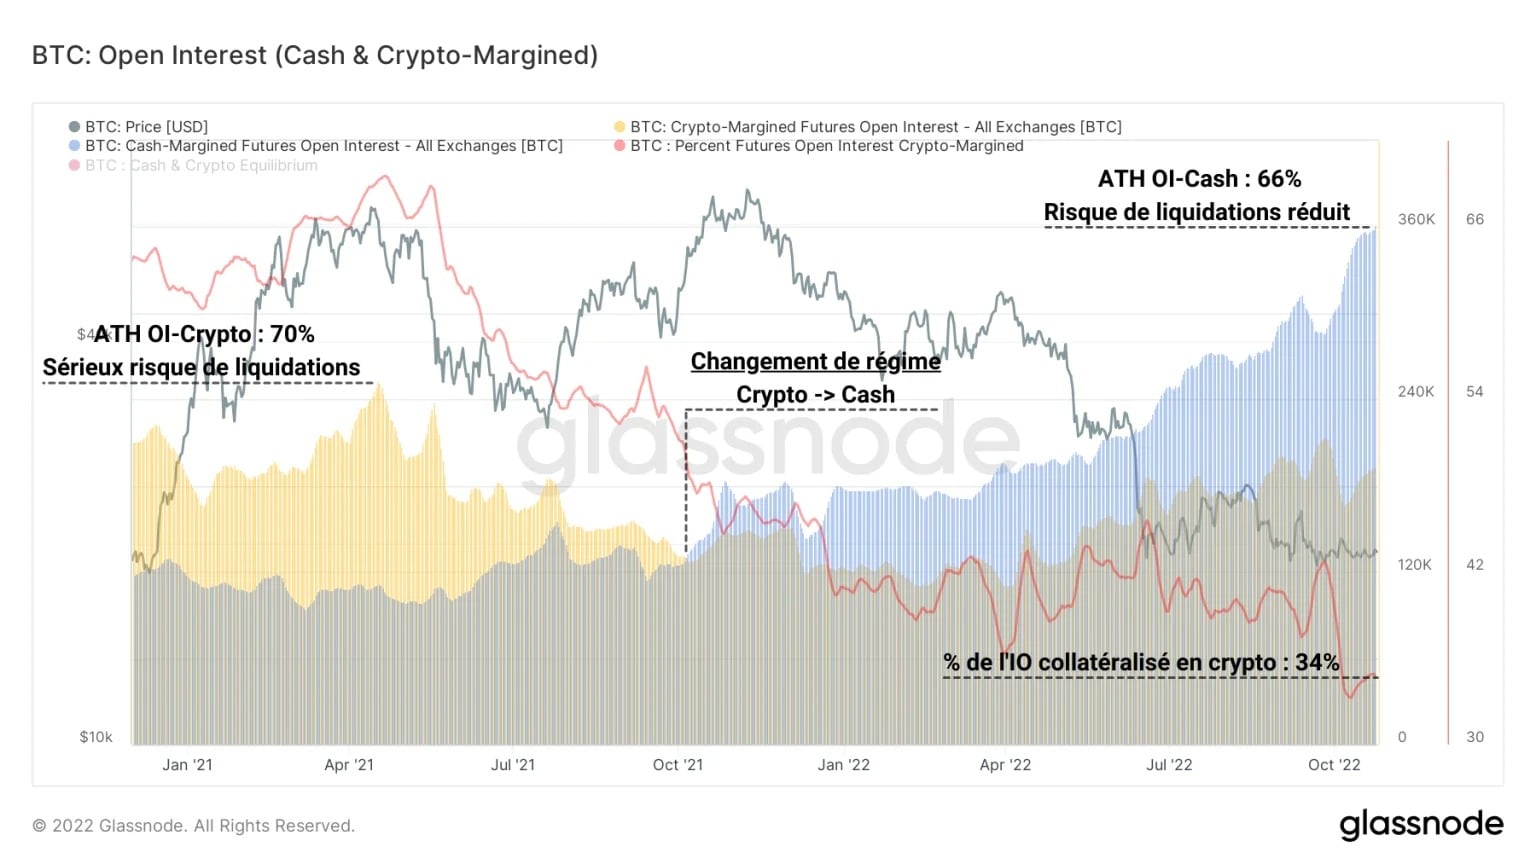 Abbildung 4: Collateralized Open Interest in Crypto & Collateralized Open Interest in Cash/Stablecoin